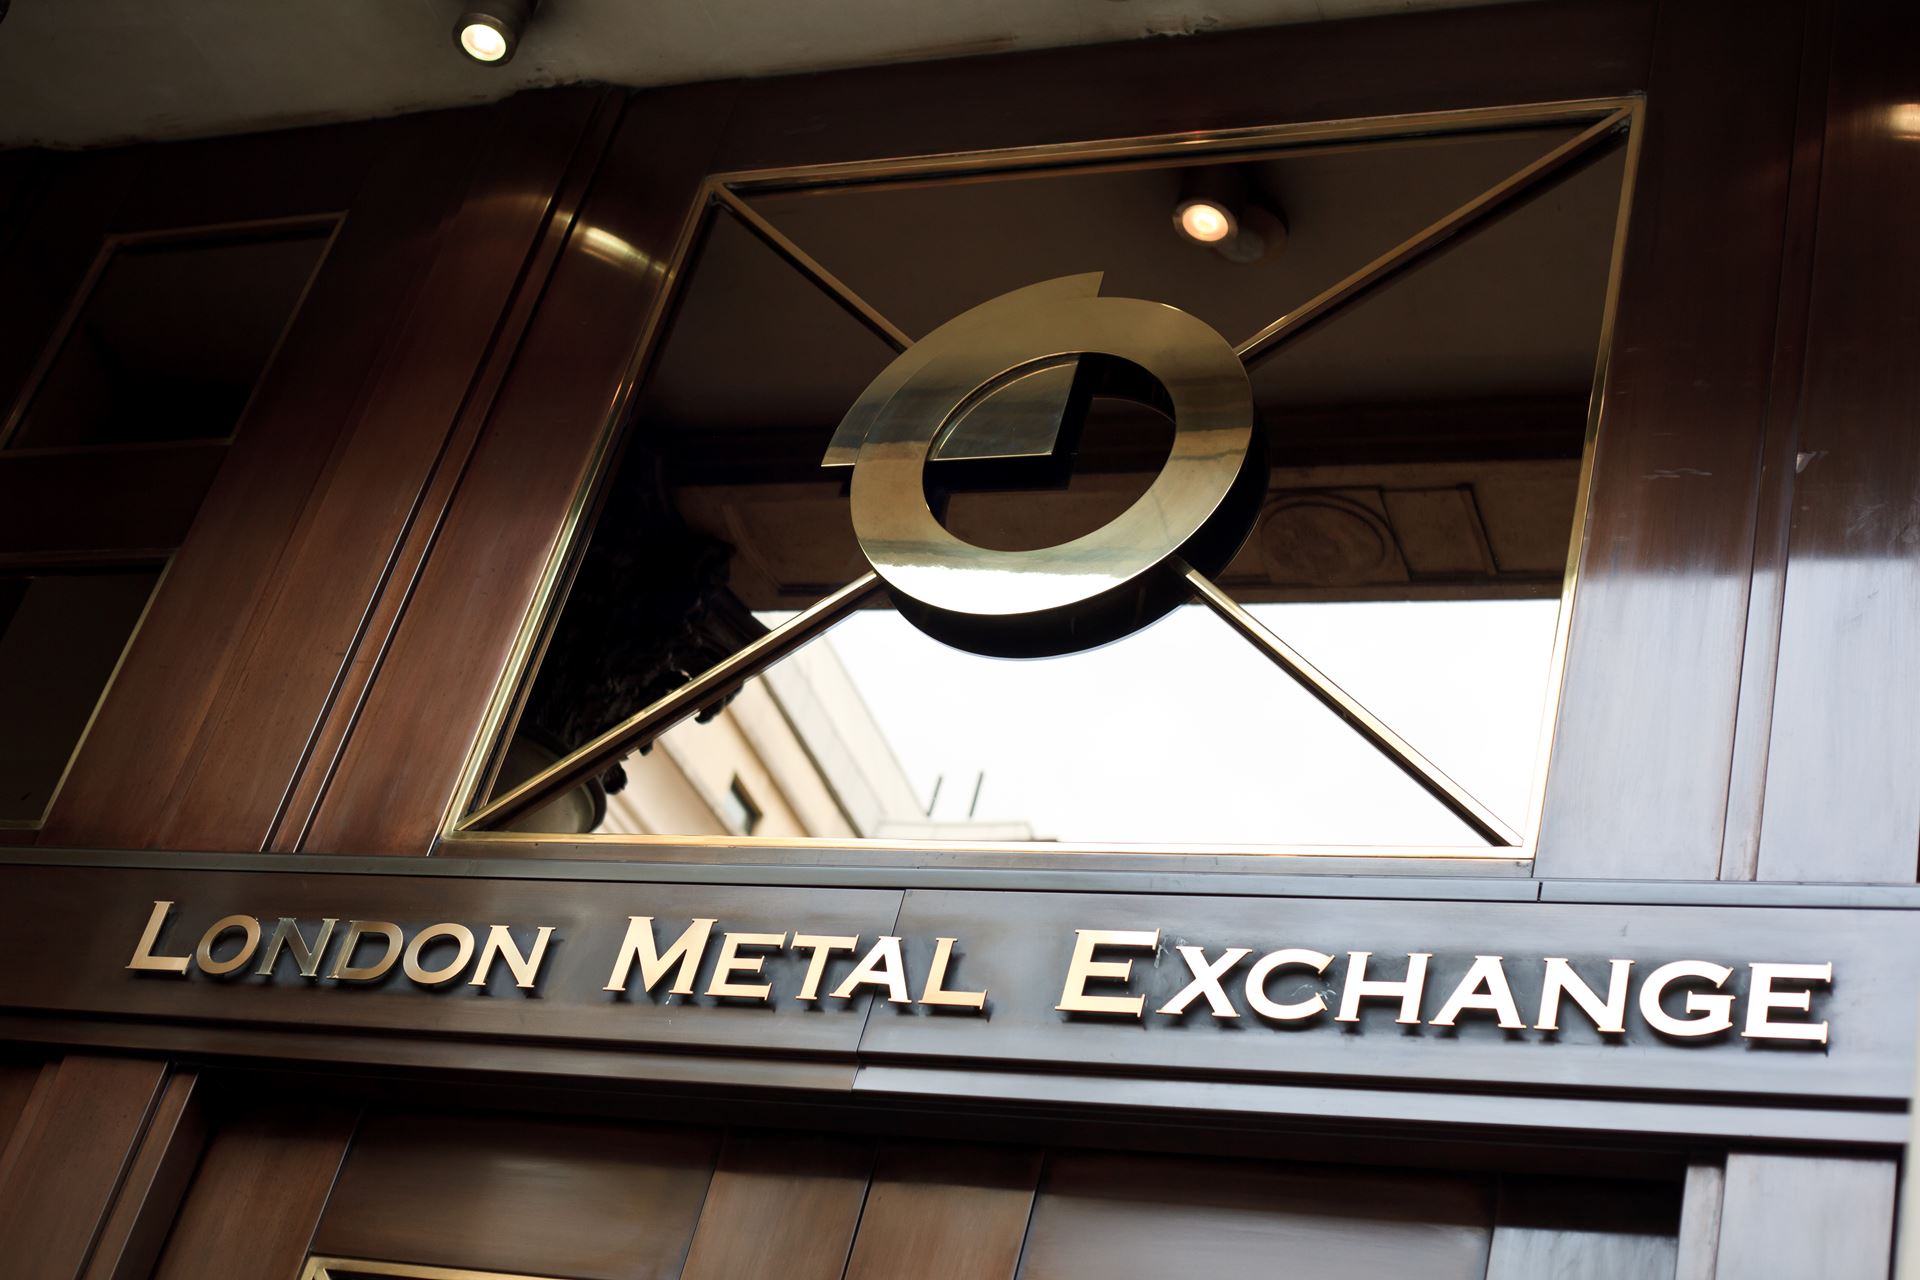 London Metal Exchange's new electronic trading system has been postponed